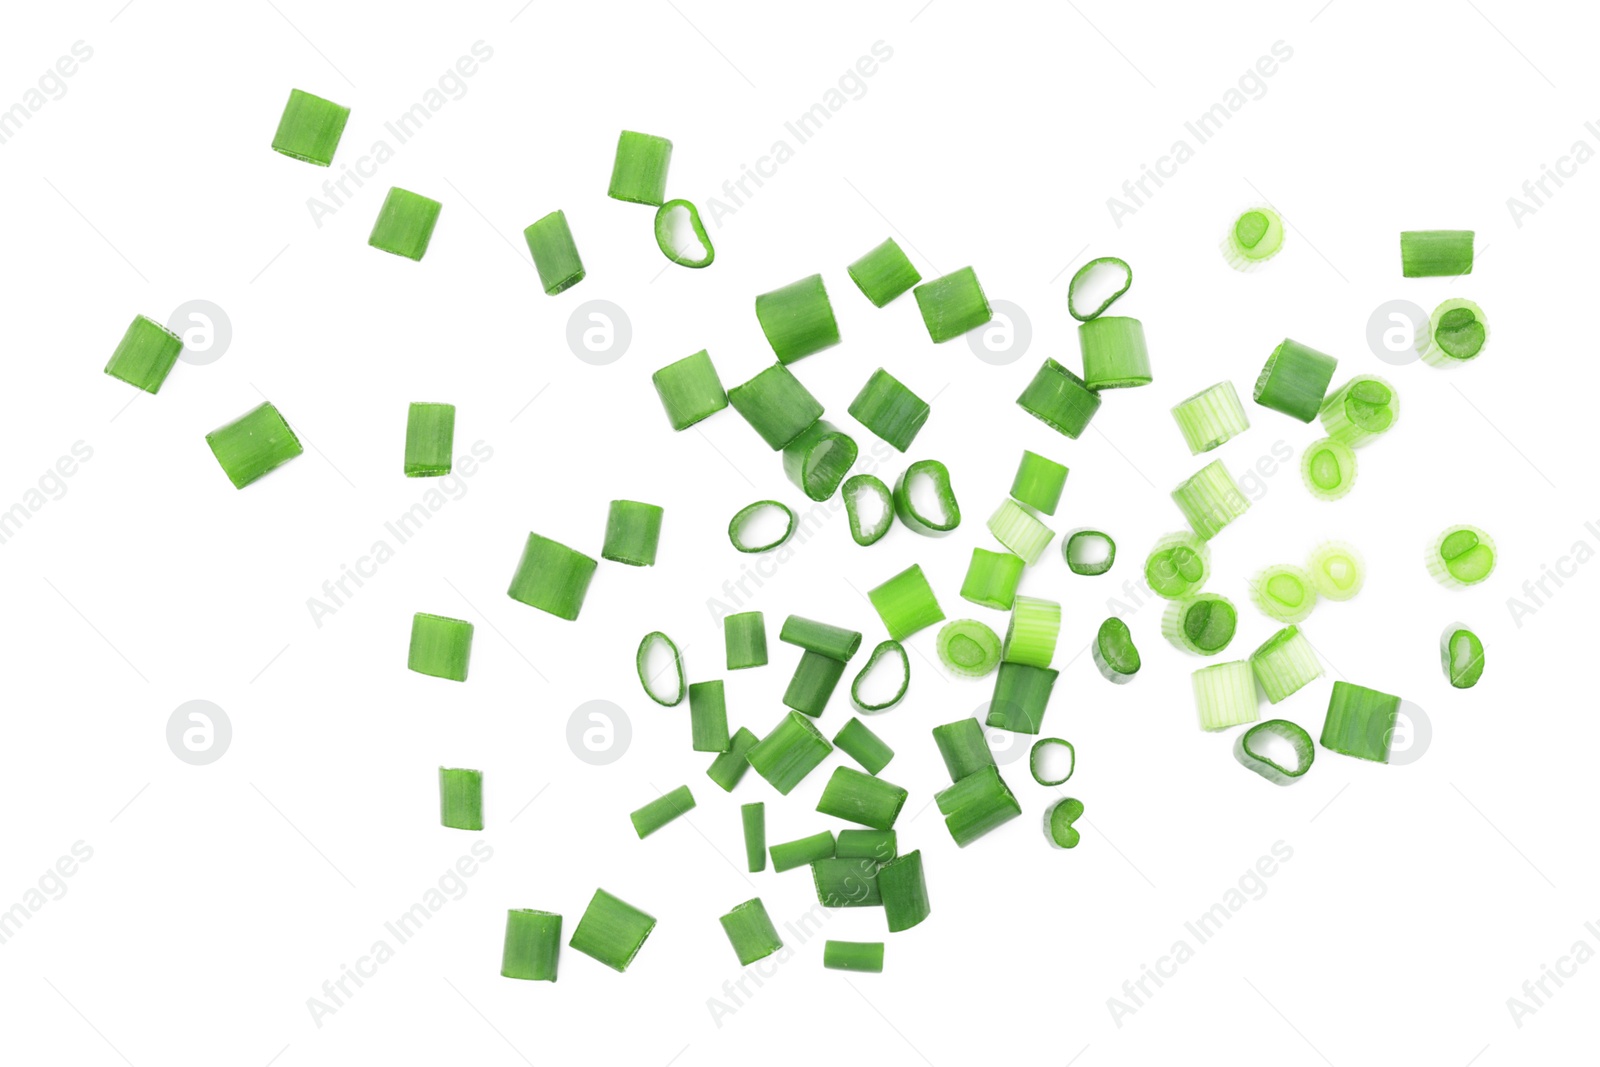 Photo of Chopped fresh green onions on white background, top view